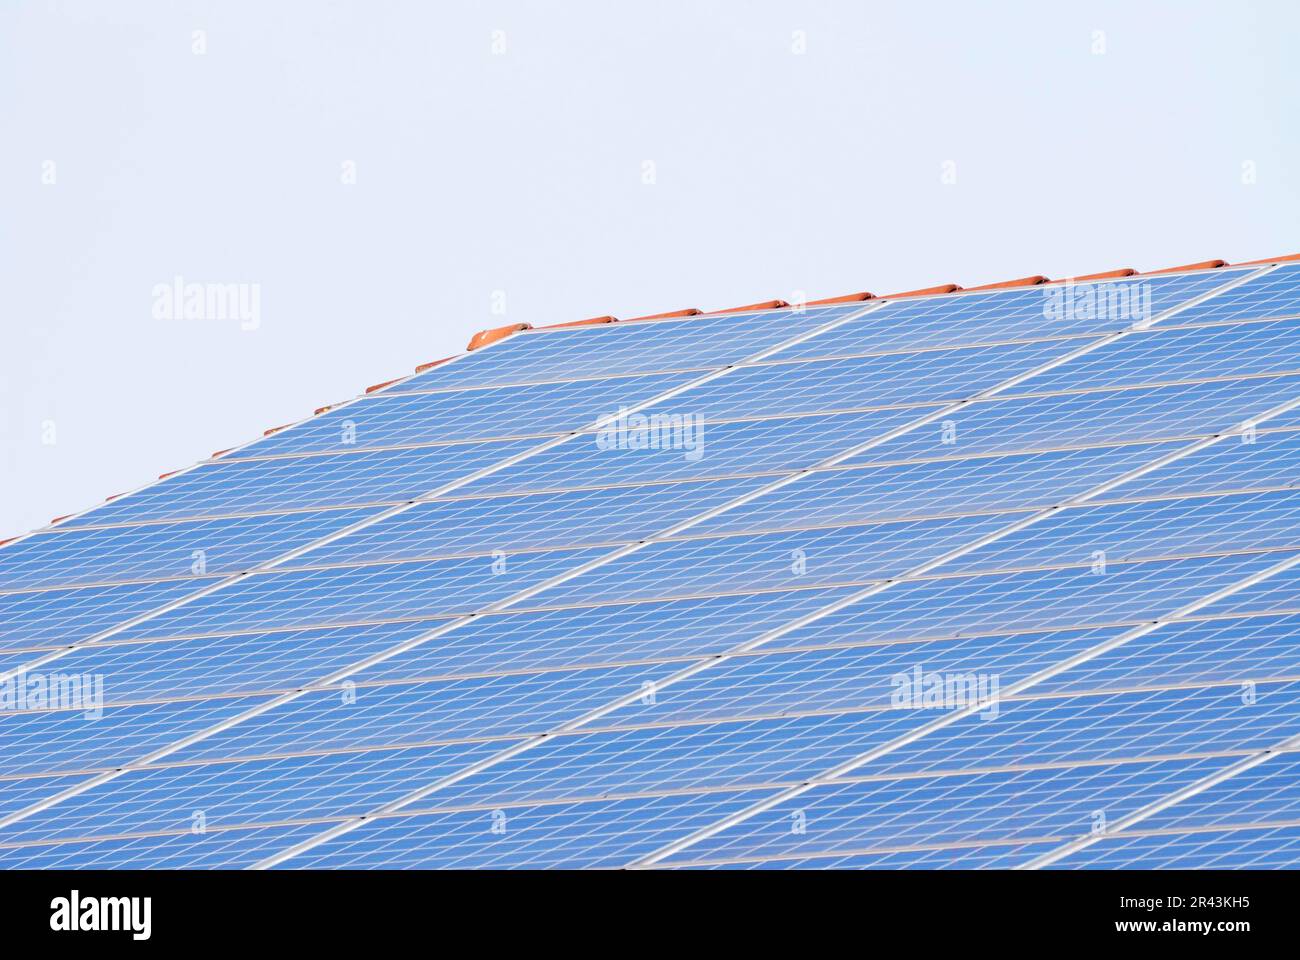 Alternative energy with photovoltaic panels on the roof Stock Photo